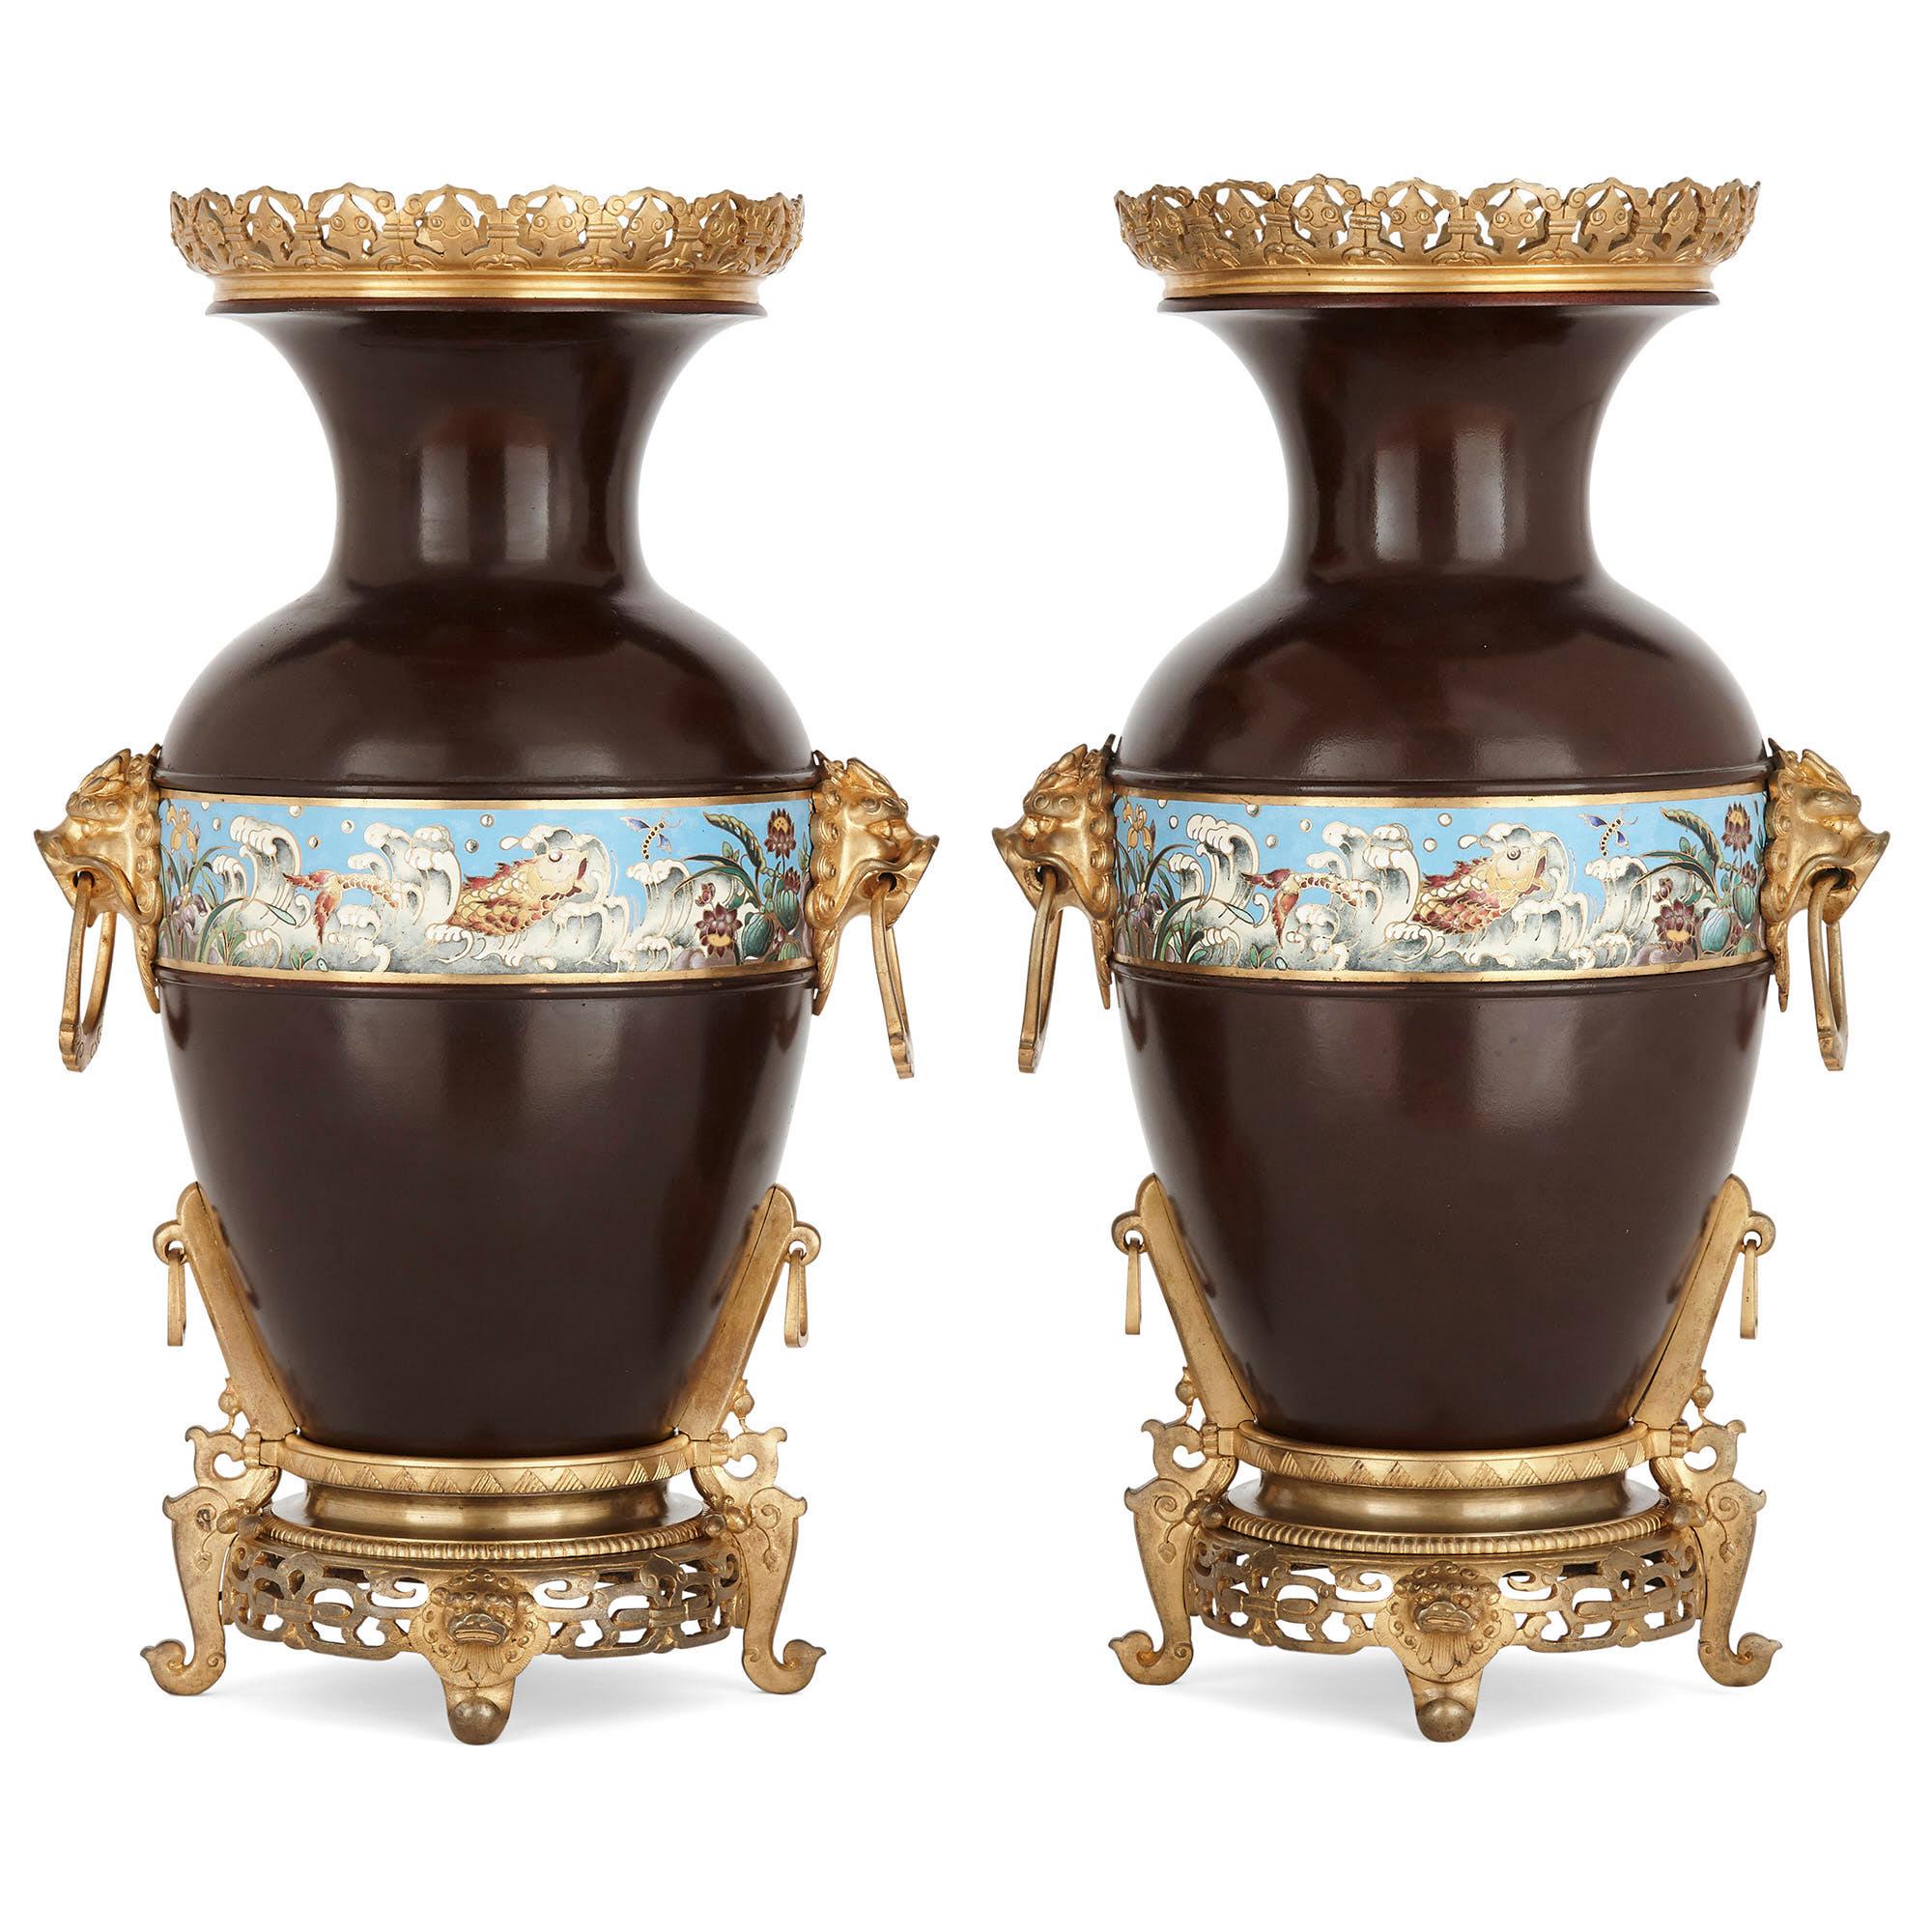 Two Chinese style enameled gilt and patinated bronze urns
French, circa 1880
Measures: Height 44.5cm, width 27cm, depth 20cm

Each urn, or vase, is of typical form with bulbous body leading to a narrow neck with outward flaring circular rim. The